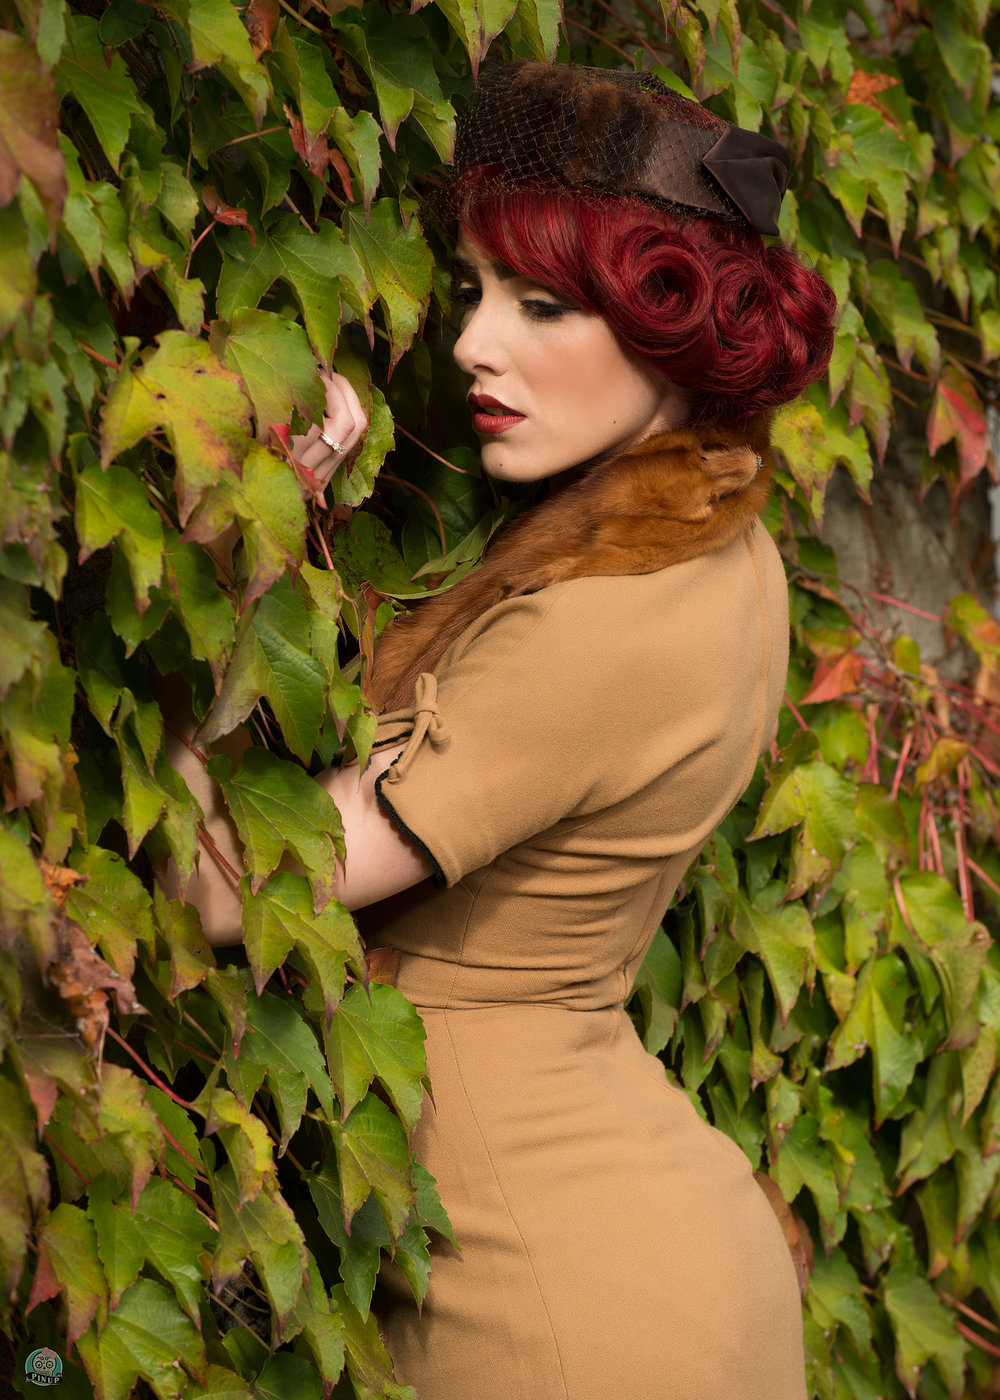 Mercedes Bennett strikes a pinup pose in a vintage dress. Photo by Little Skull Photography. 